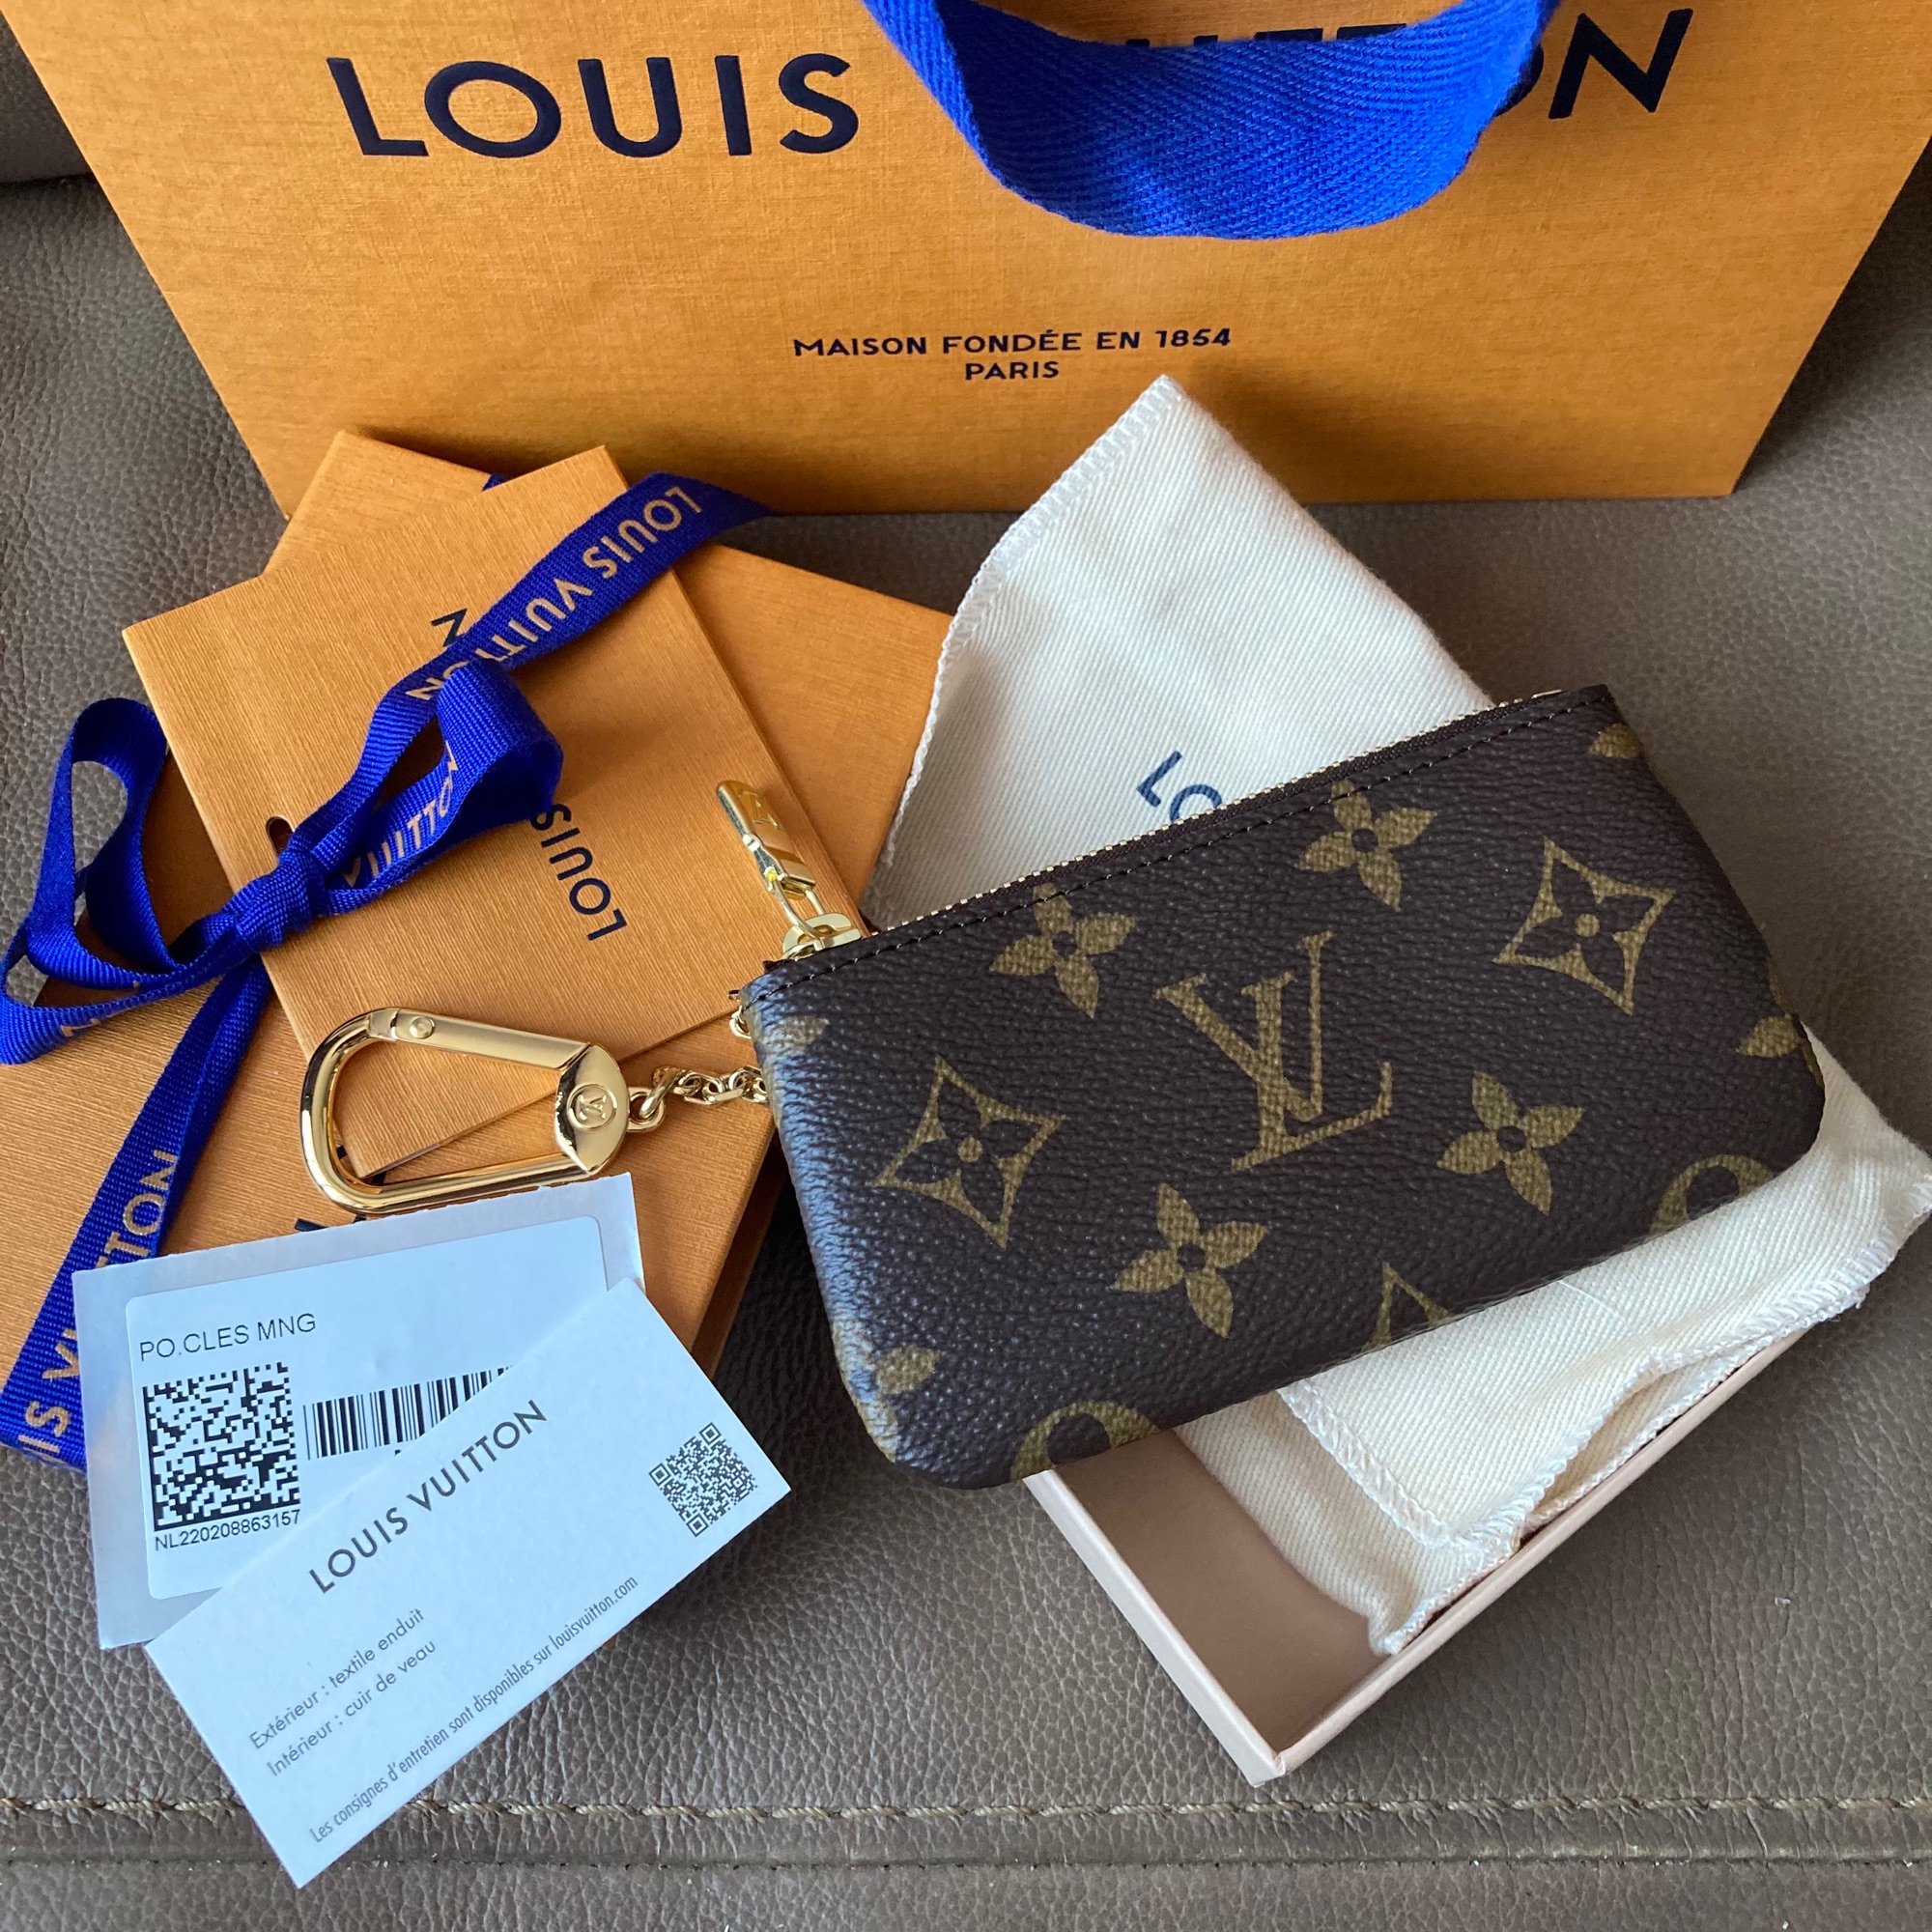 Pin by Bre Williams on Lv key pouch in 2023  Cheap louis vuitton bags, Lv  key pouch, Cheap louis vuitton handbags